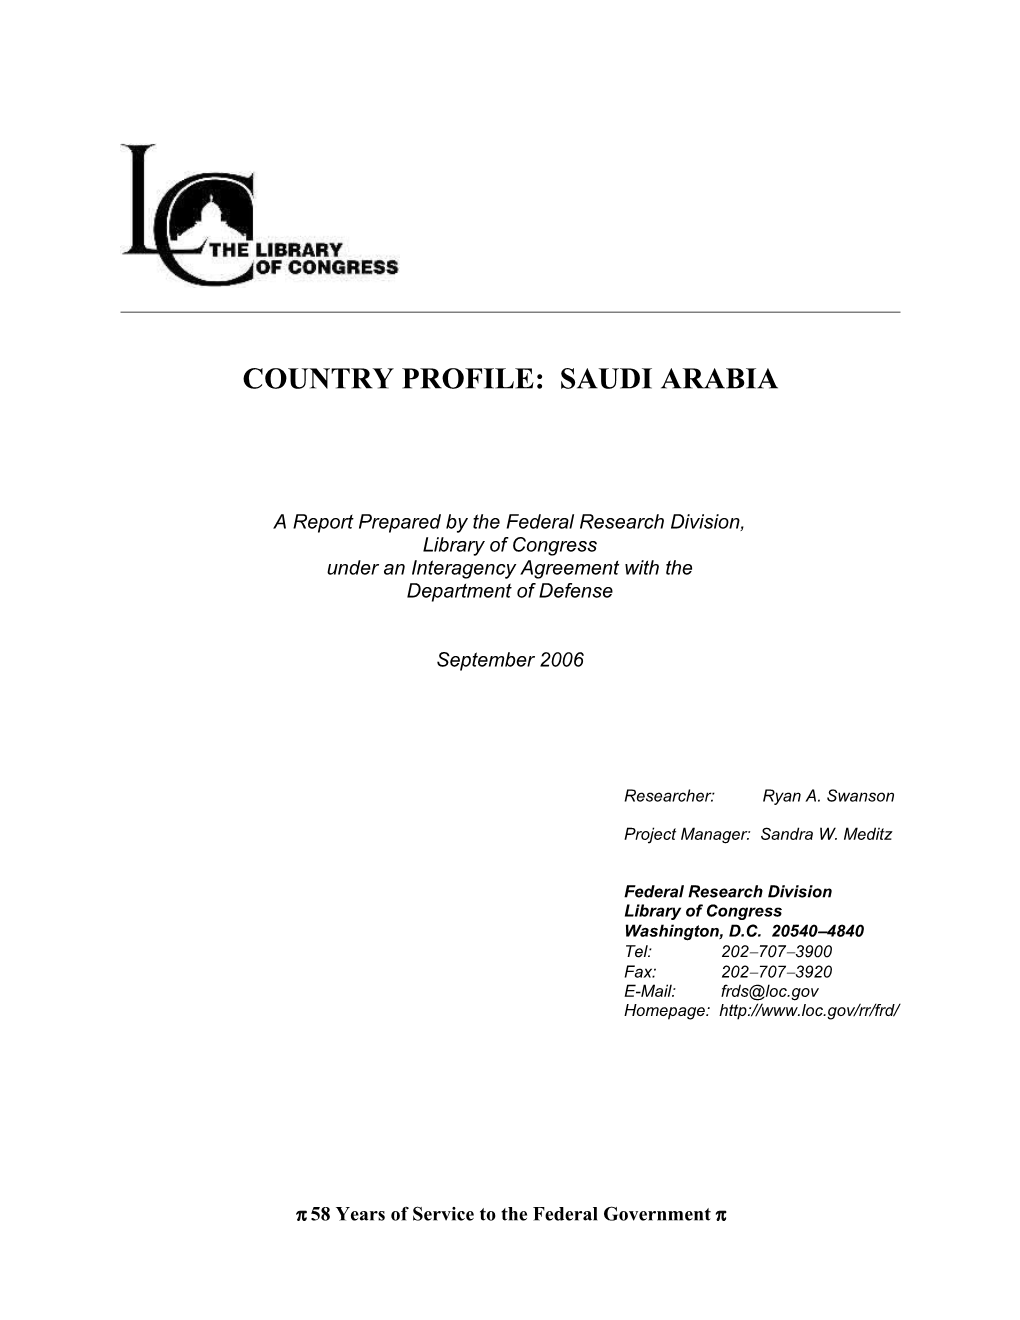 Library of Congress Federal Research Division Country Profile: Saudi Arabia, September 2006